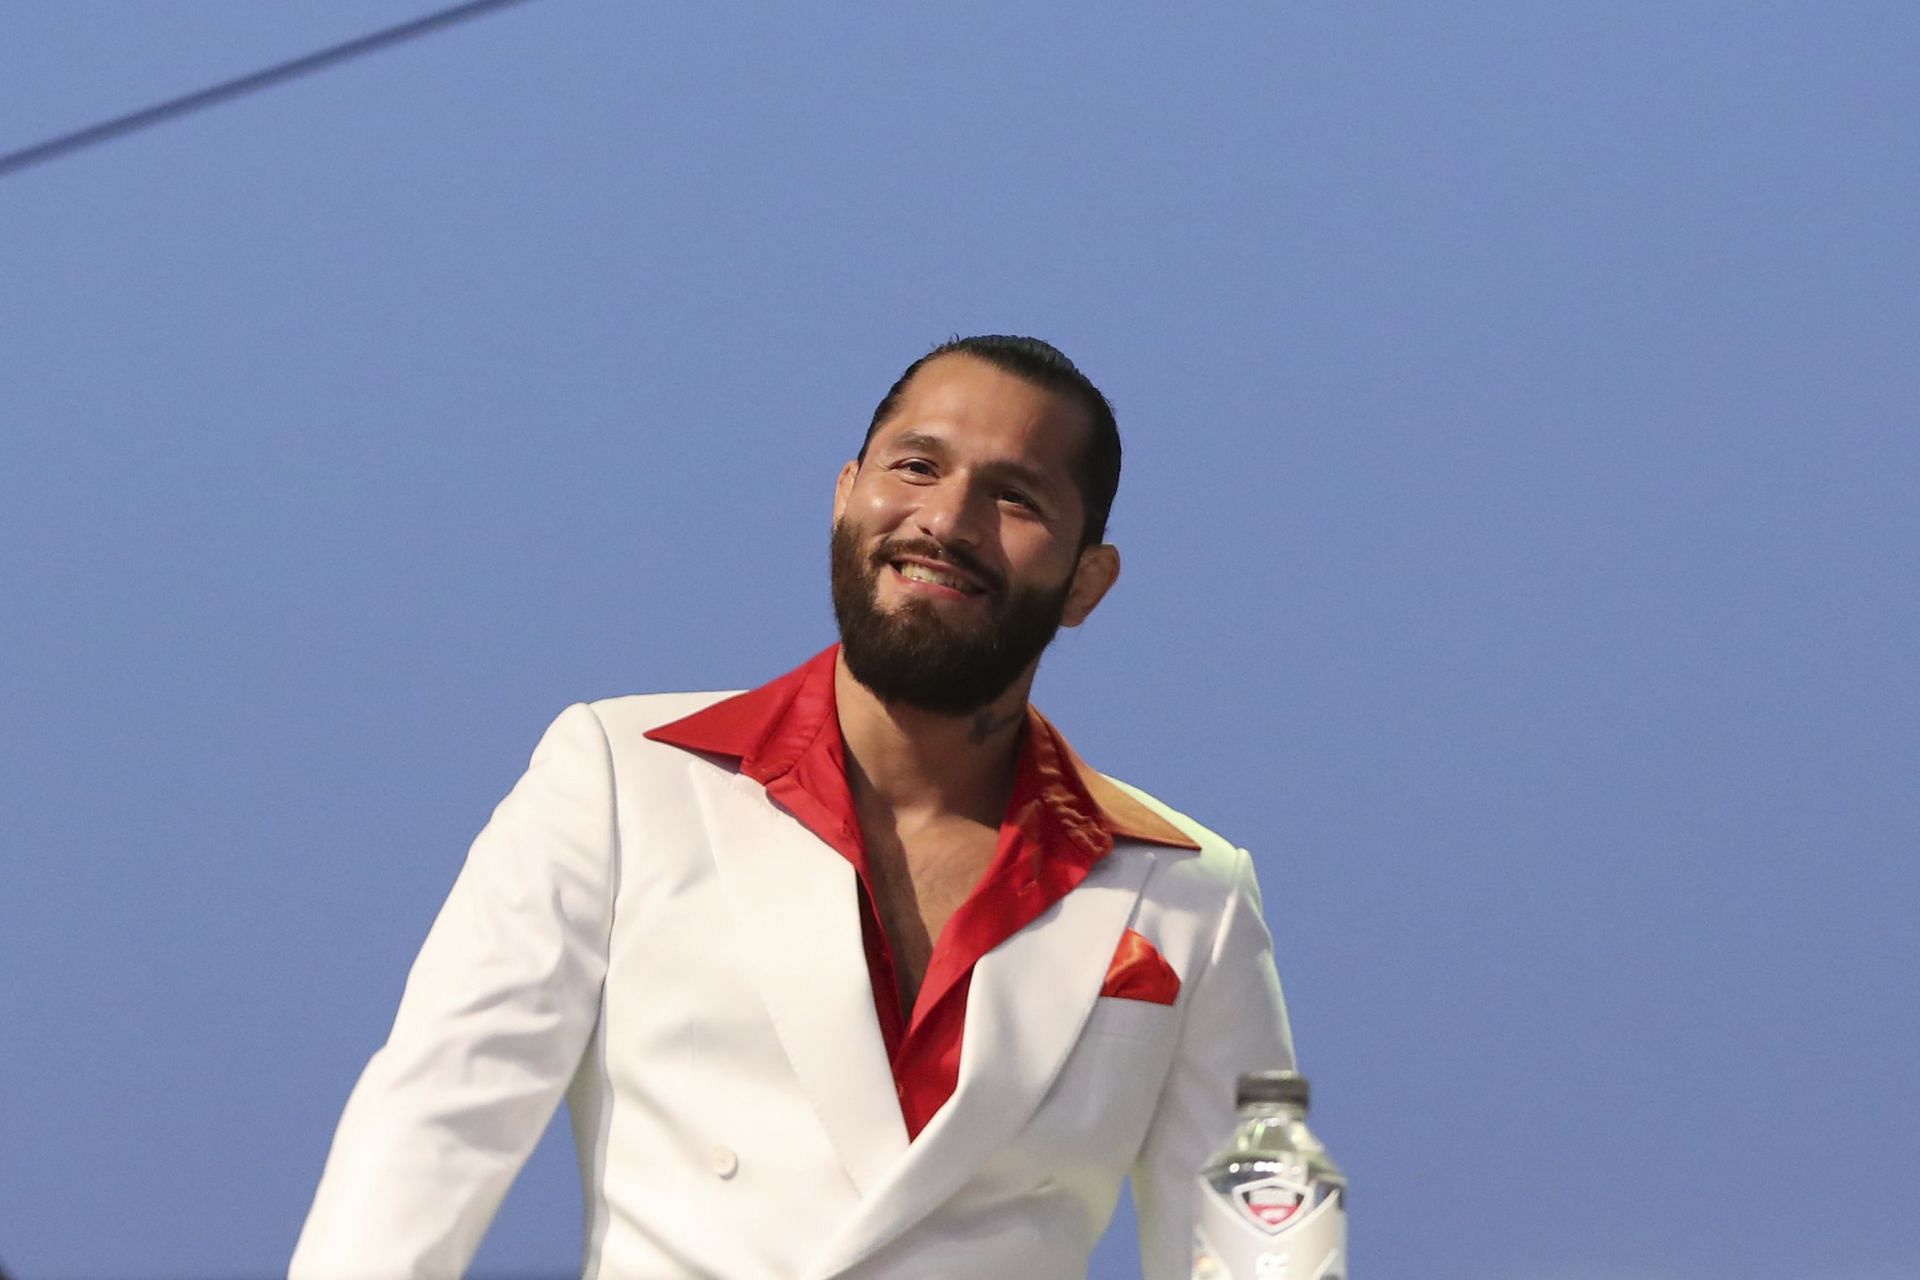 While he isn&#039;t quite on Conor McGregor&#039;s level, Jorge Masvidal is a pay-per-view draw in his own right